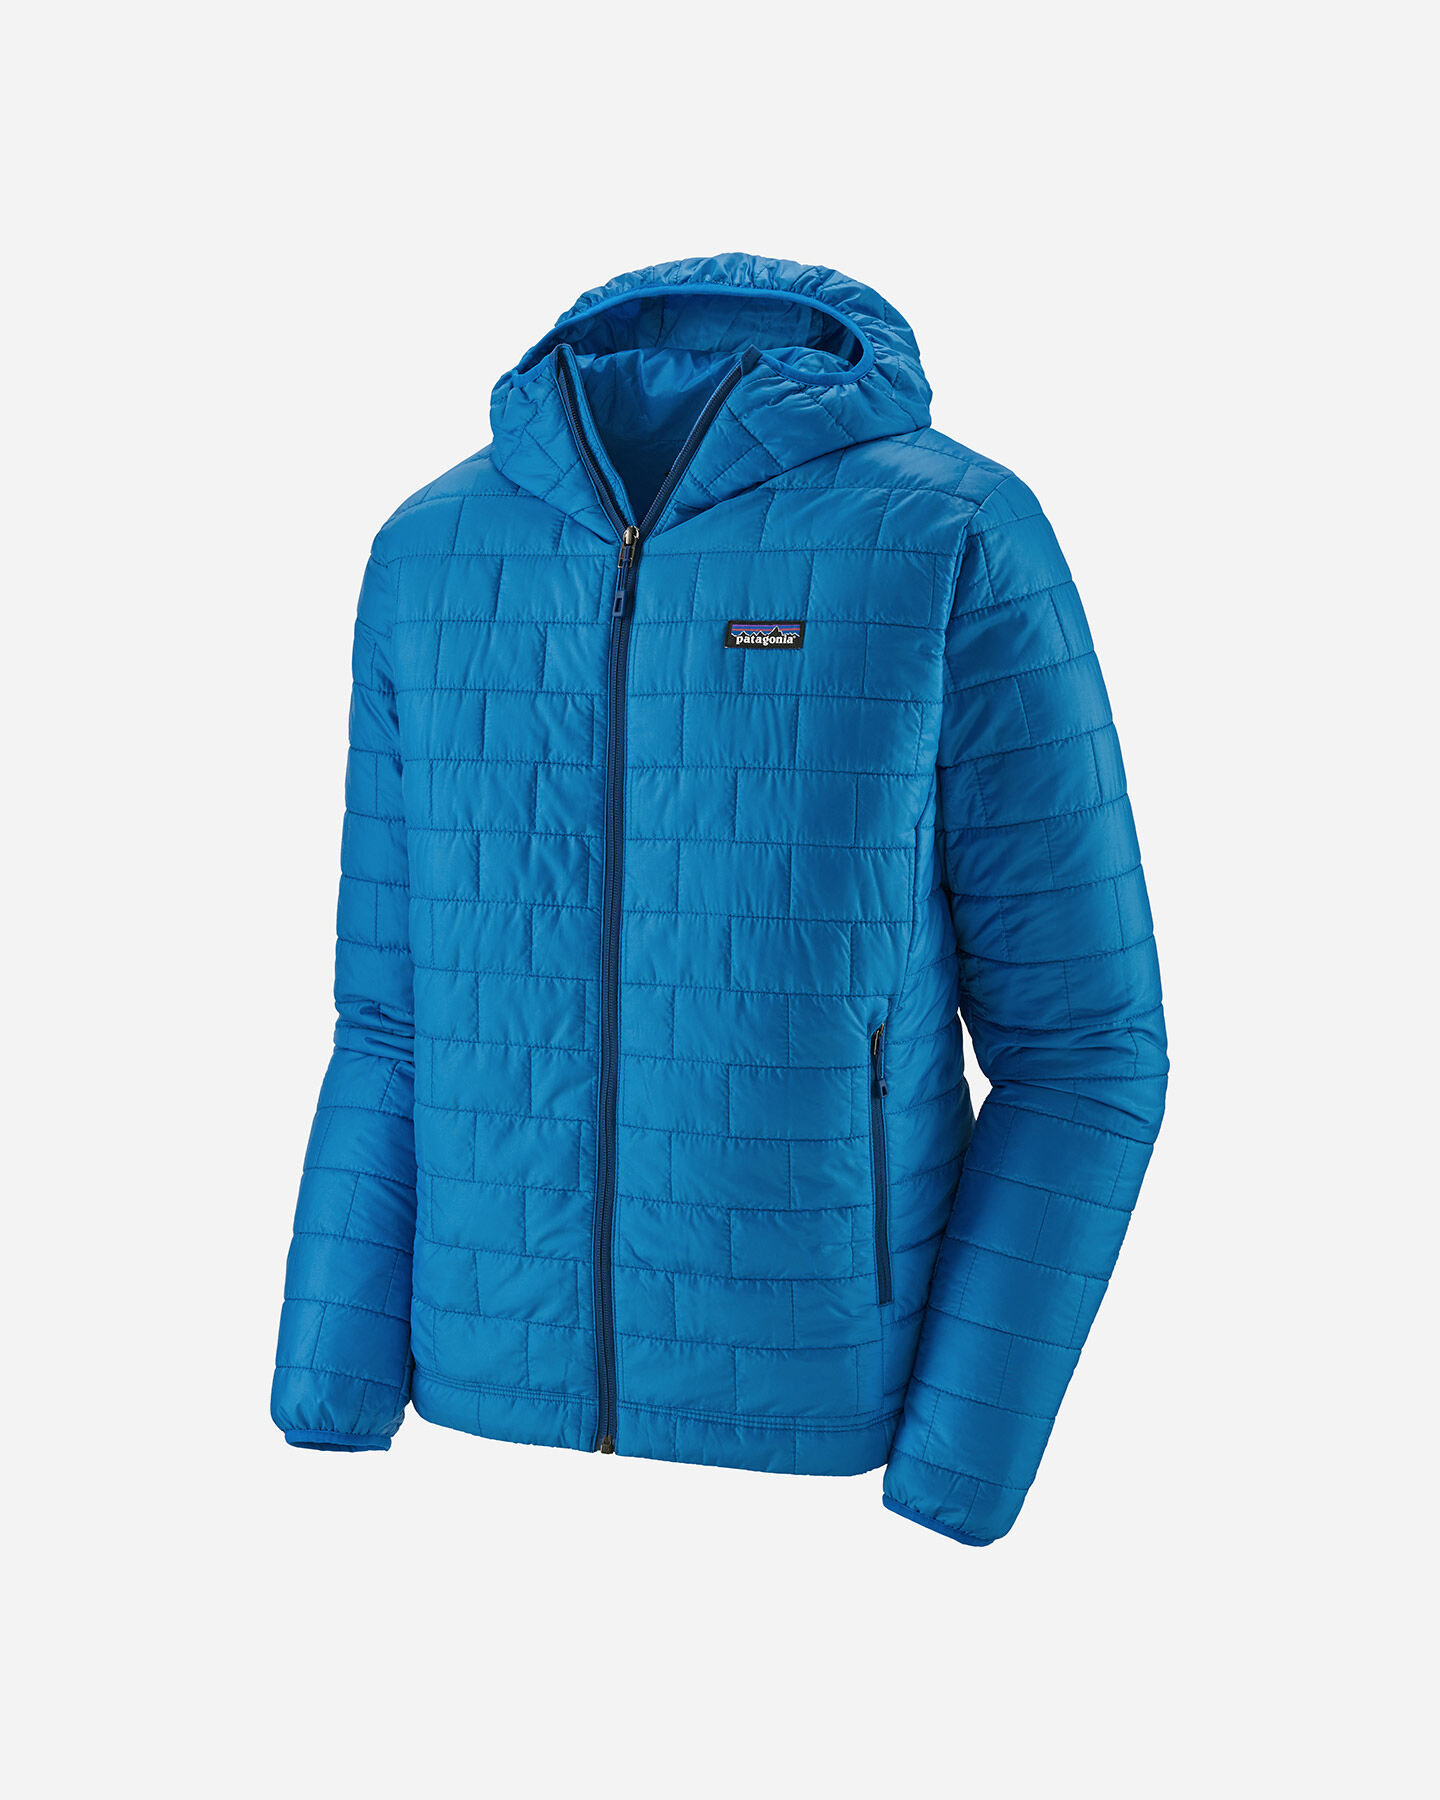  Giacca outdoor PATAGONIA NANO PUFF M S5444753|ADAB|XL scatto 2